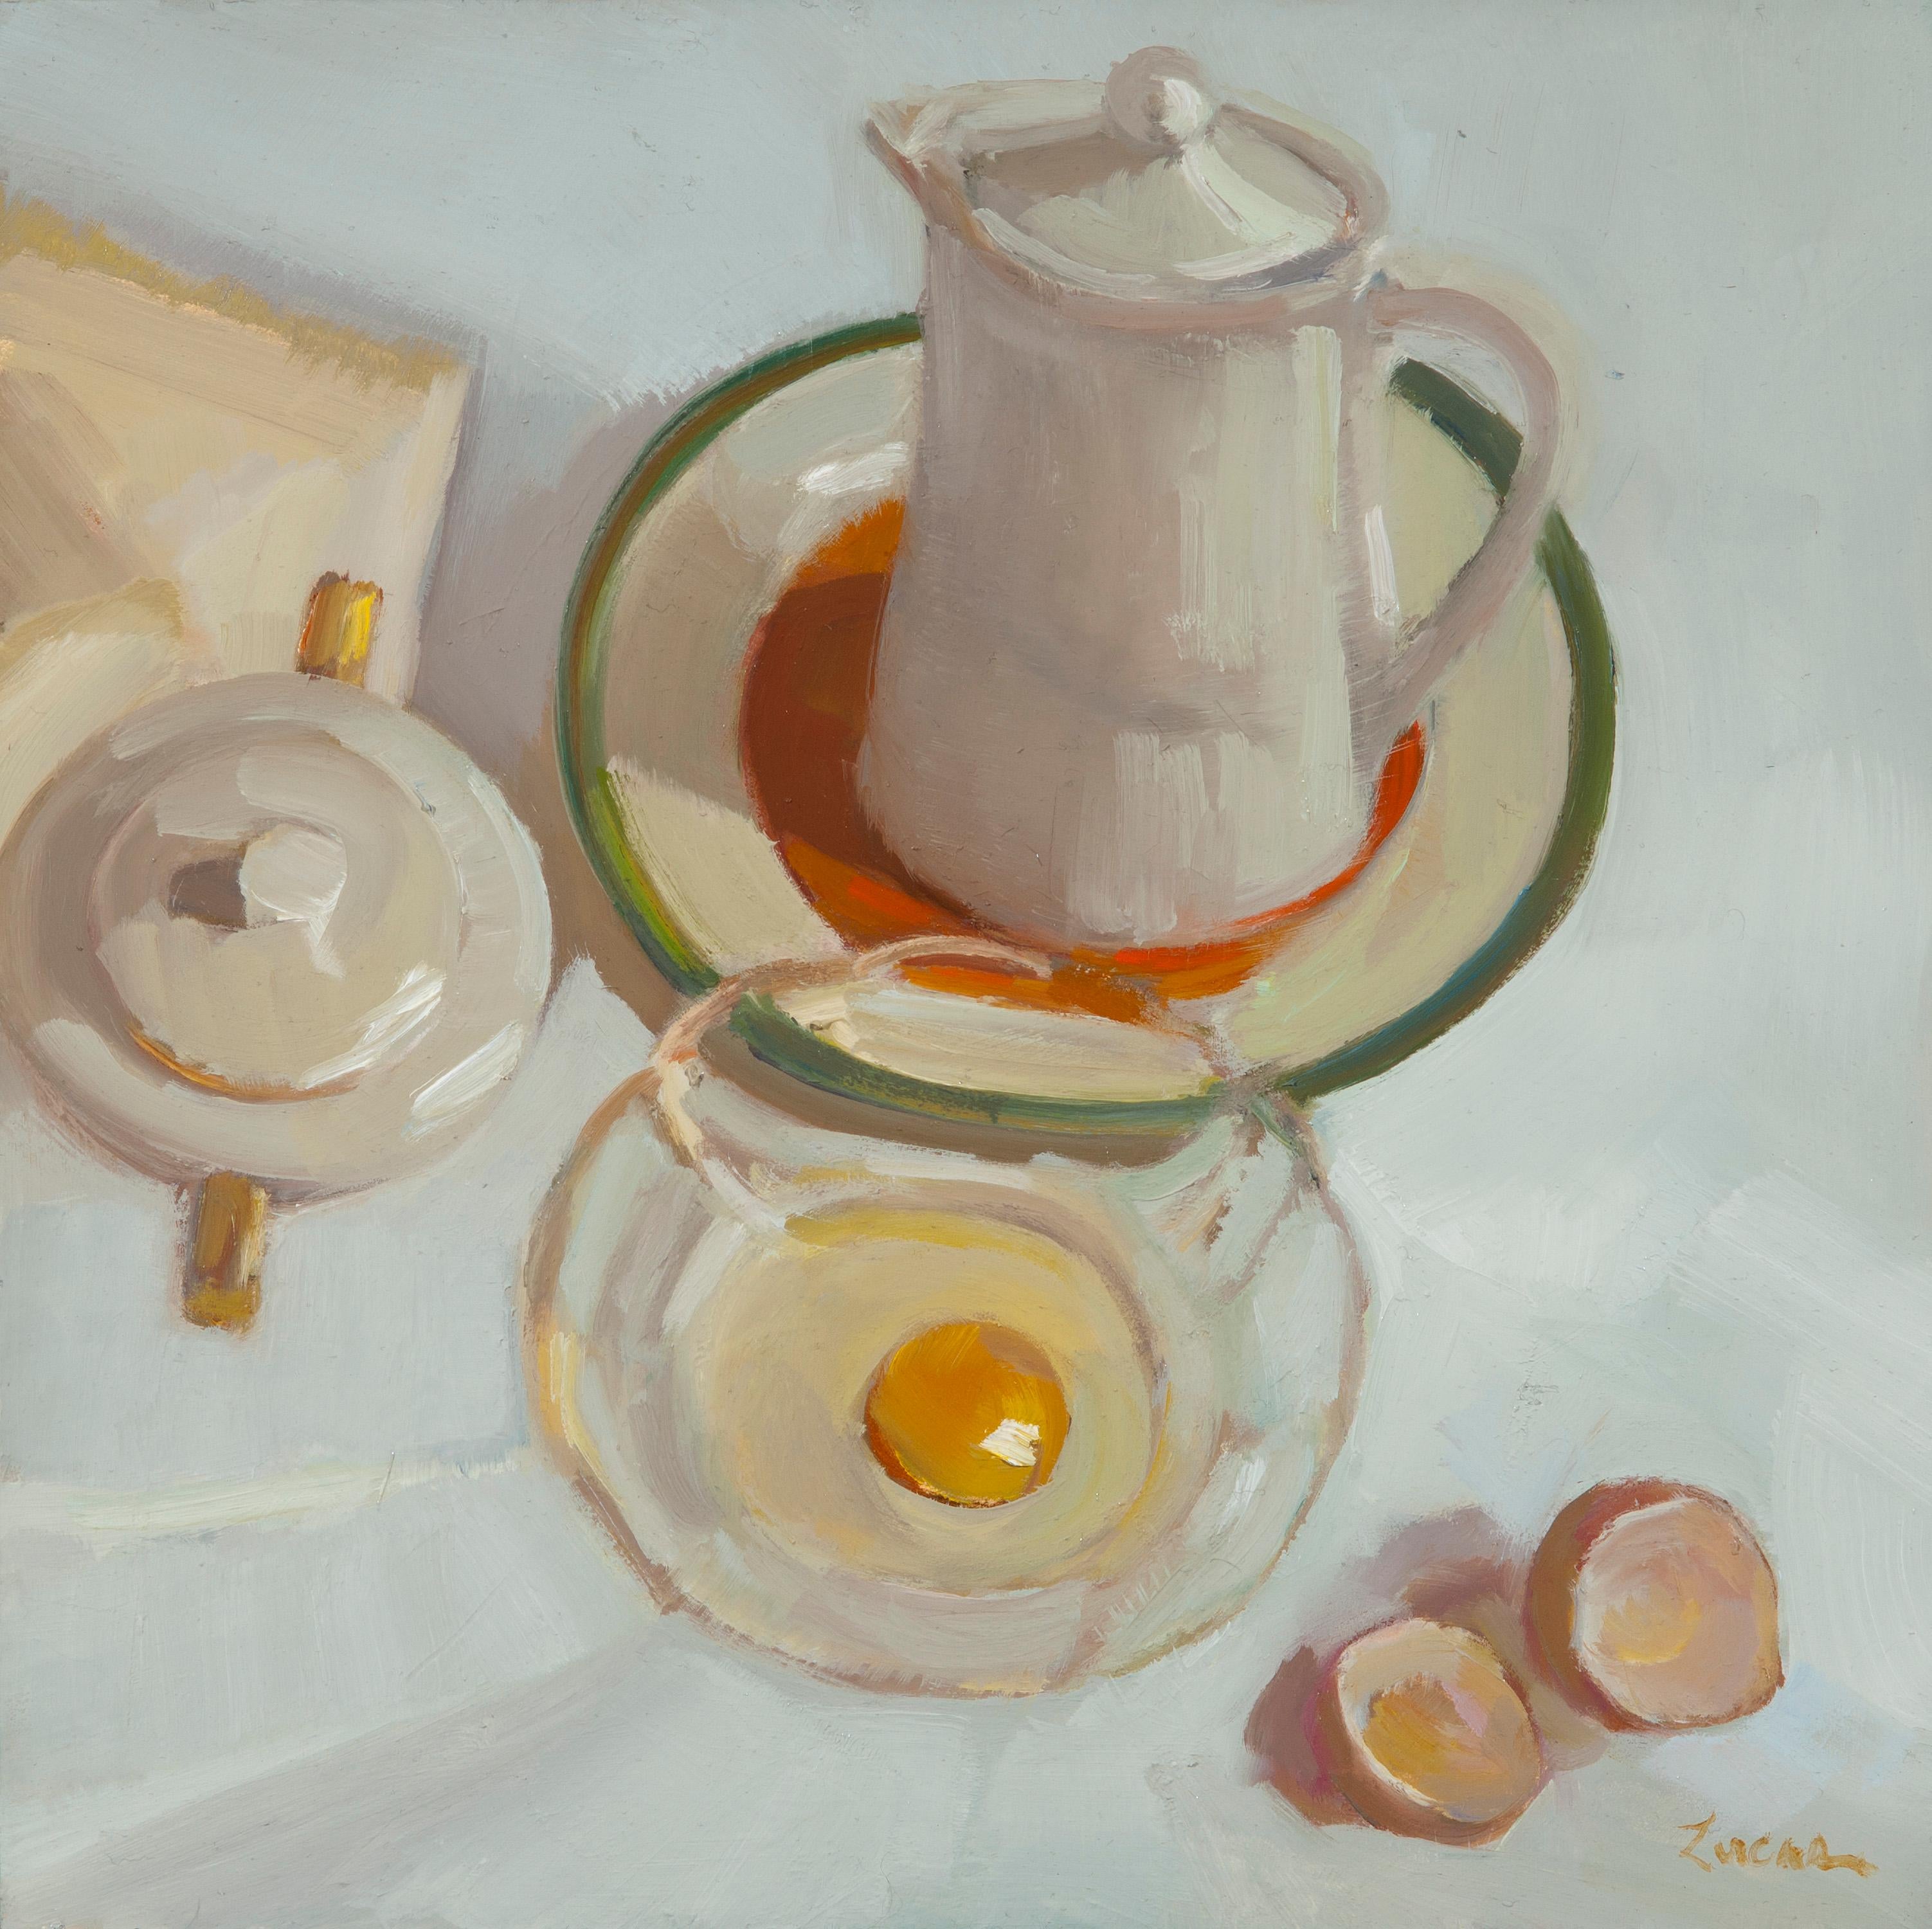 This breakfast scene, "Egg Centric", is a 12x12 still life oil painting on board featuring a white tea kettle and bowl with raw egg cracked inside. 

About the artist:
Maryann Lucas paints with a dual purpose: to become evermore skilled and